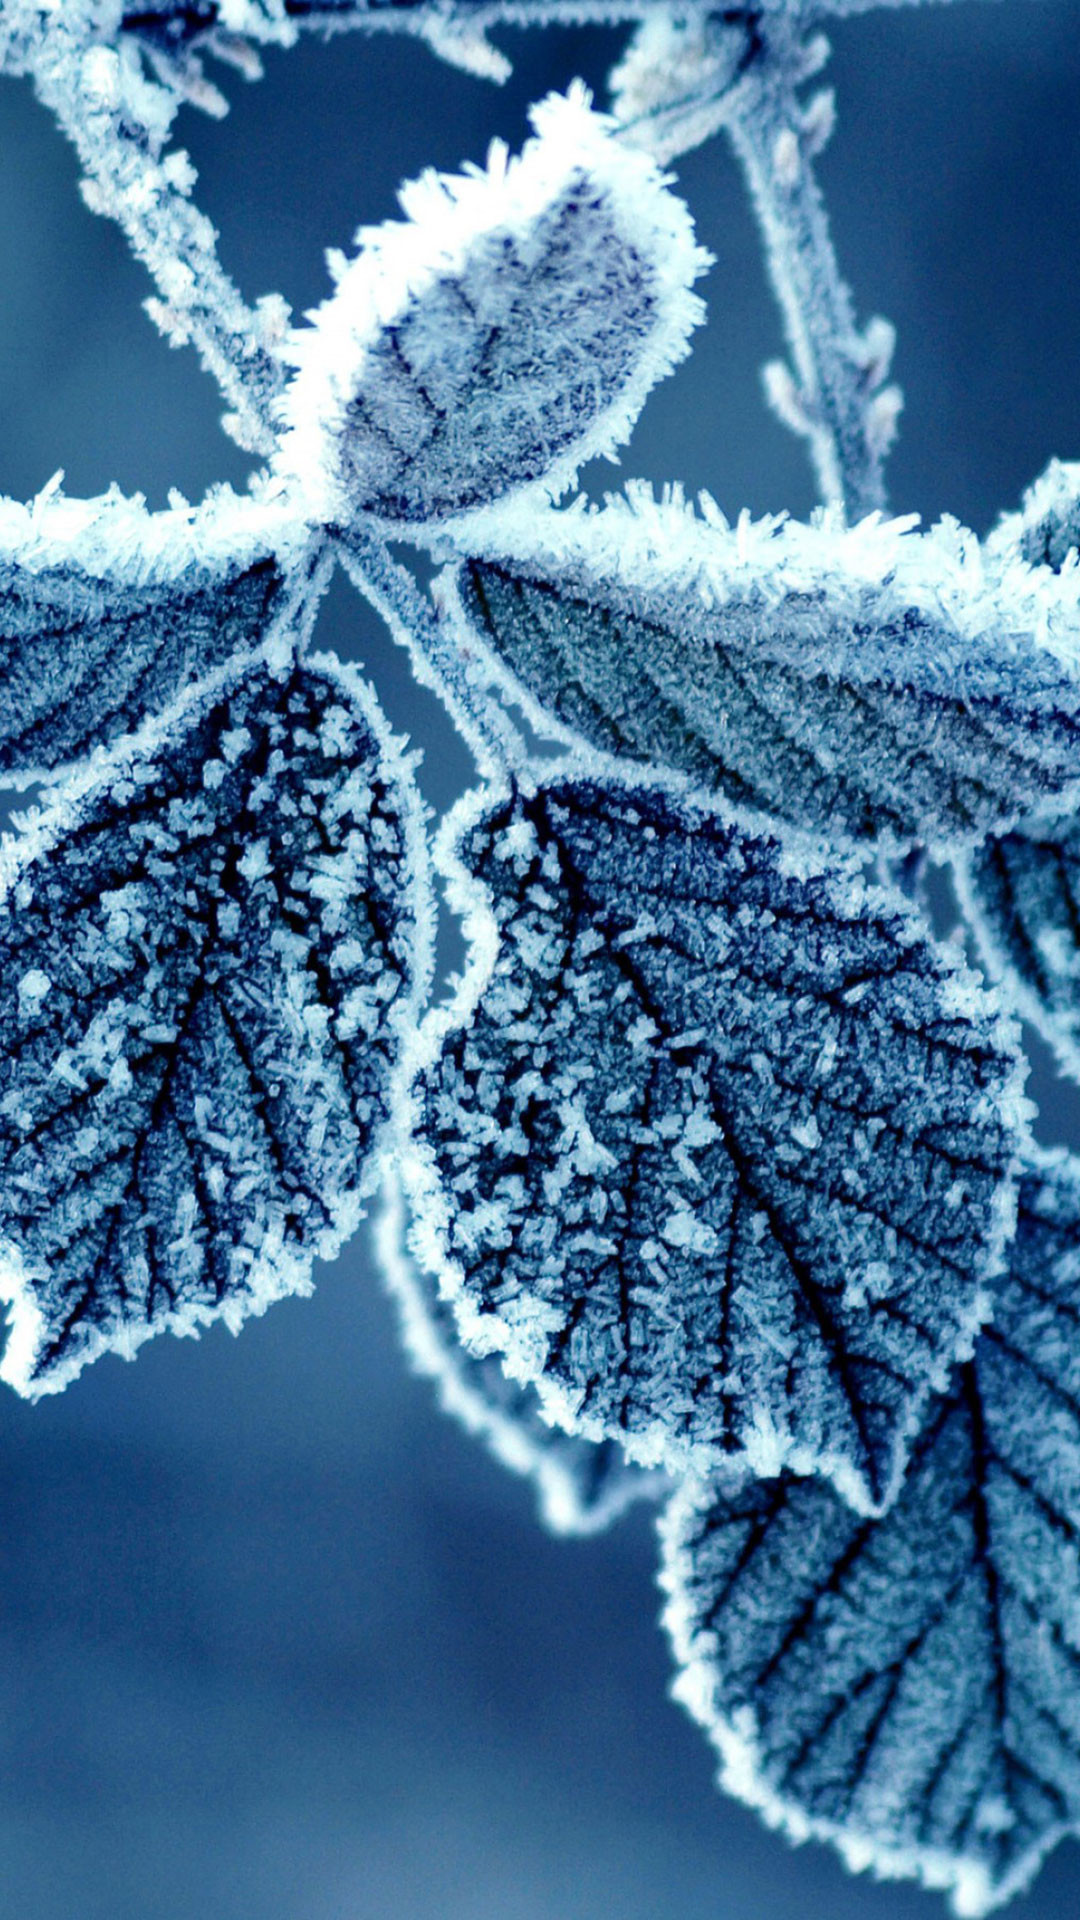 Cold Winter Morning Frosted LeavesiPhone 6S Plus Wallpaper